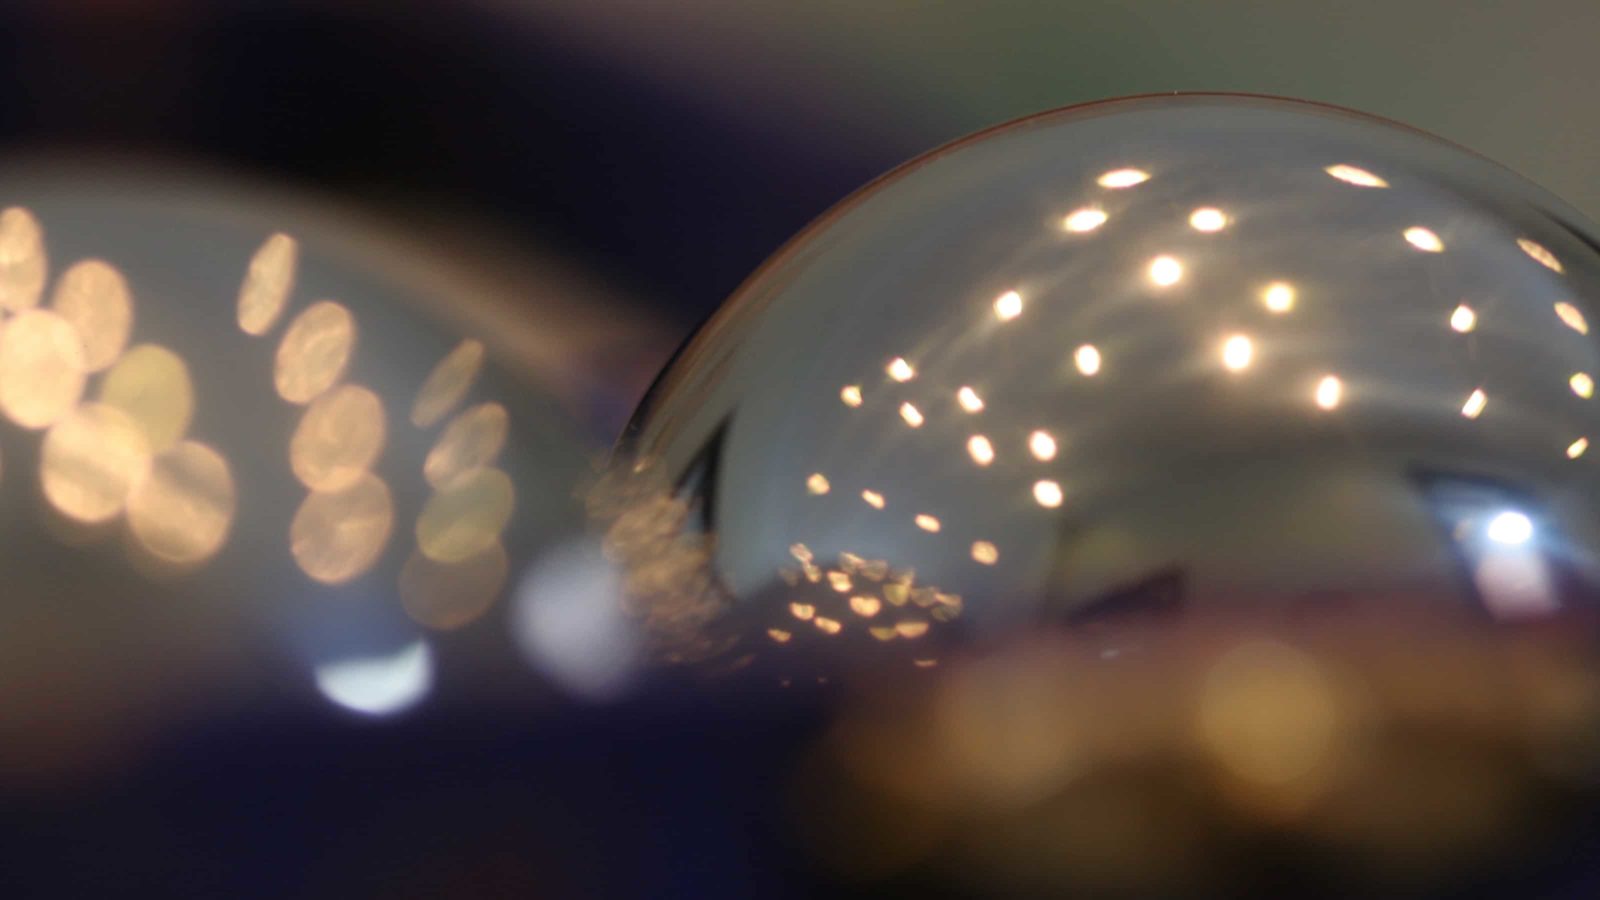 Light reflects the curves of metallic globes.